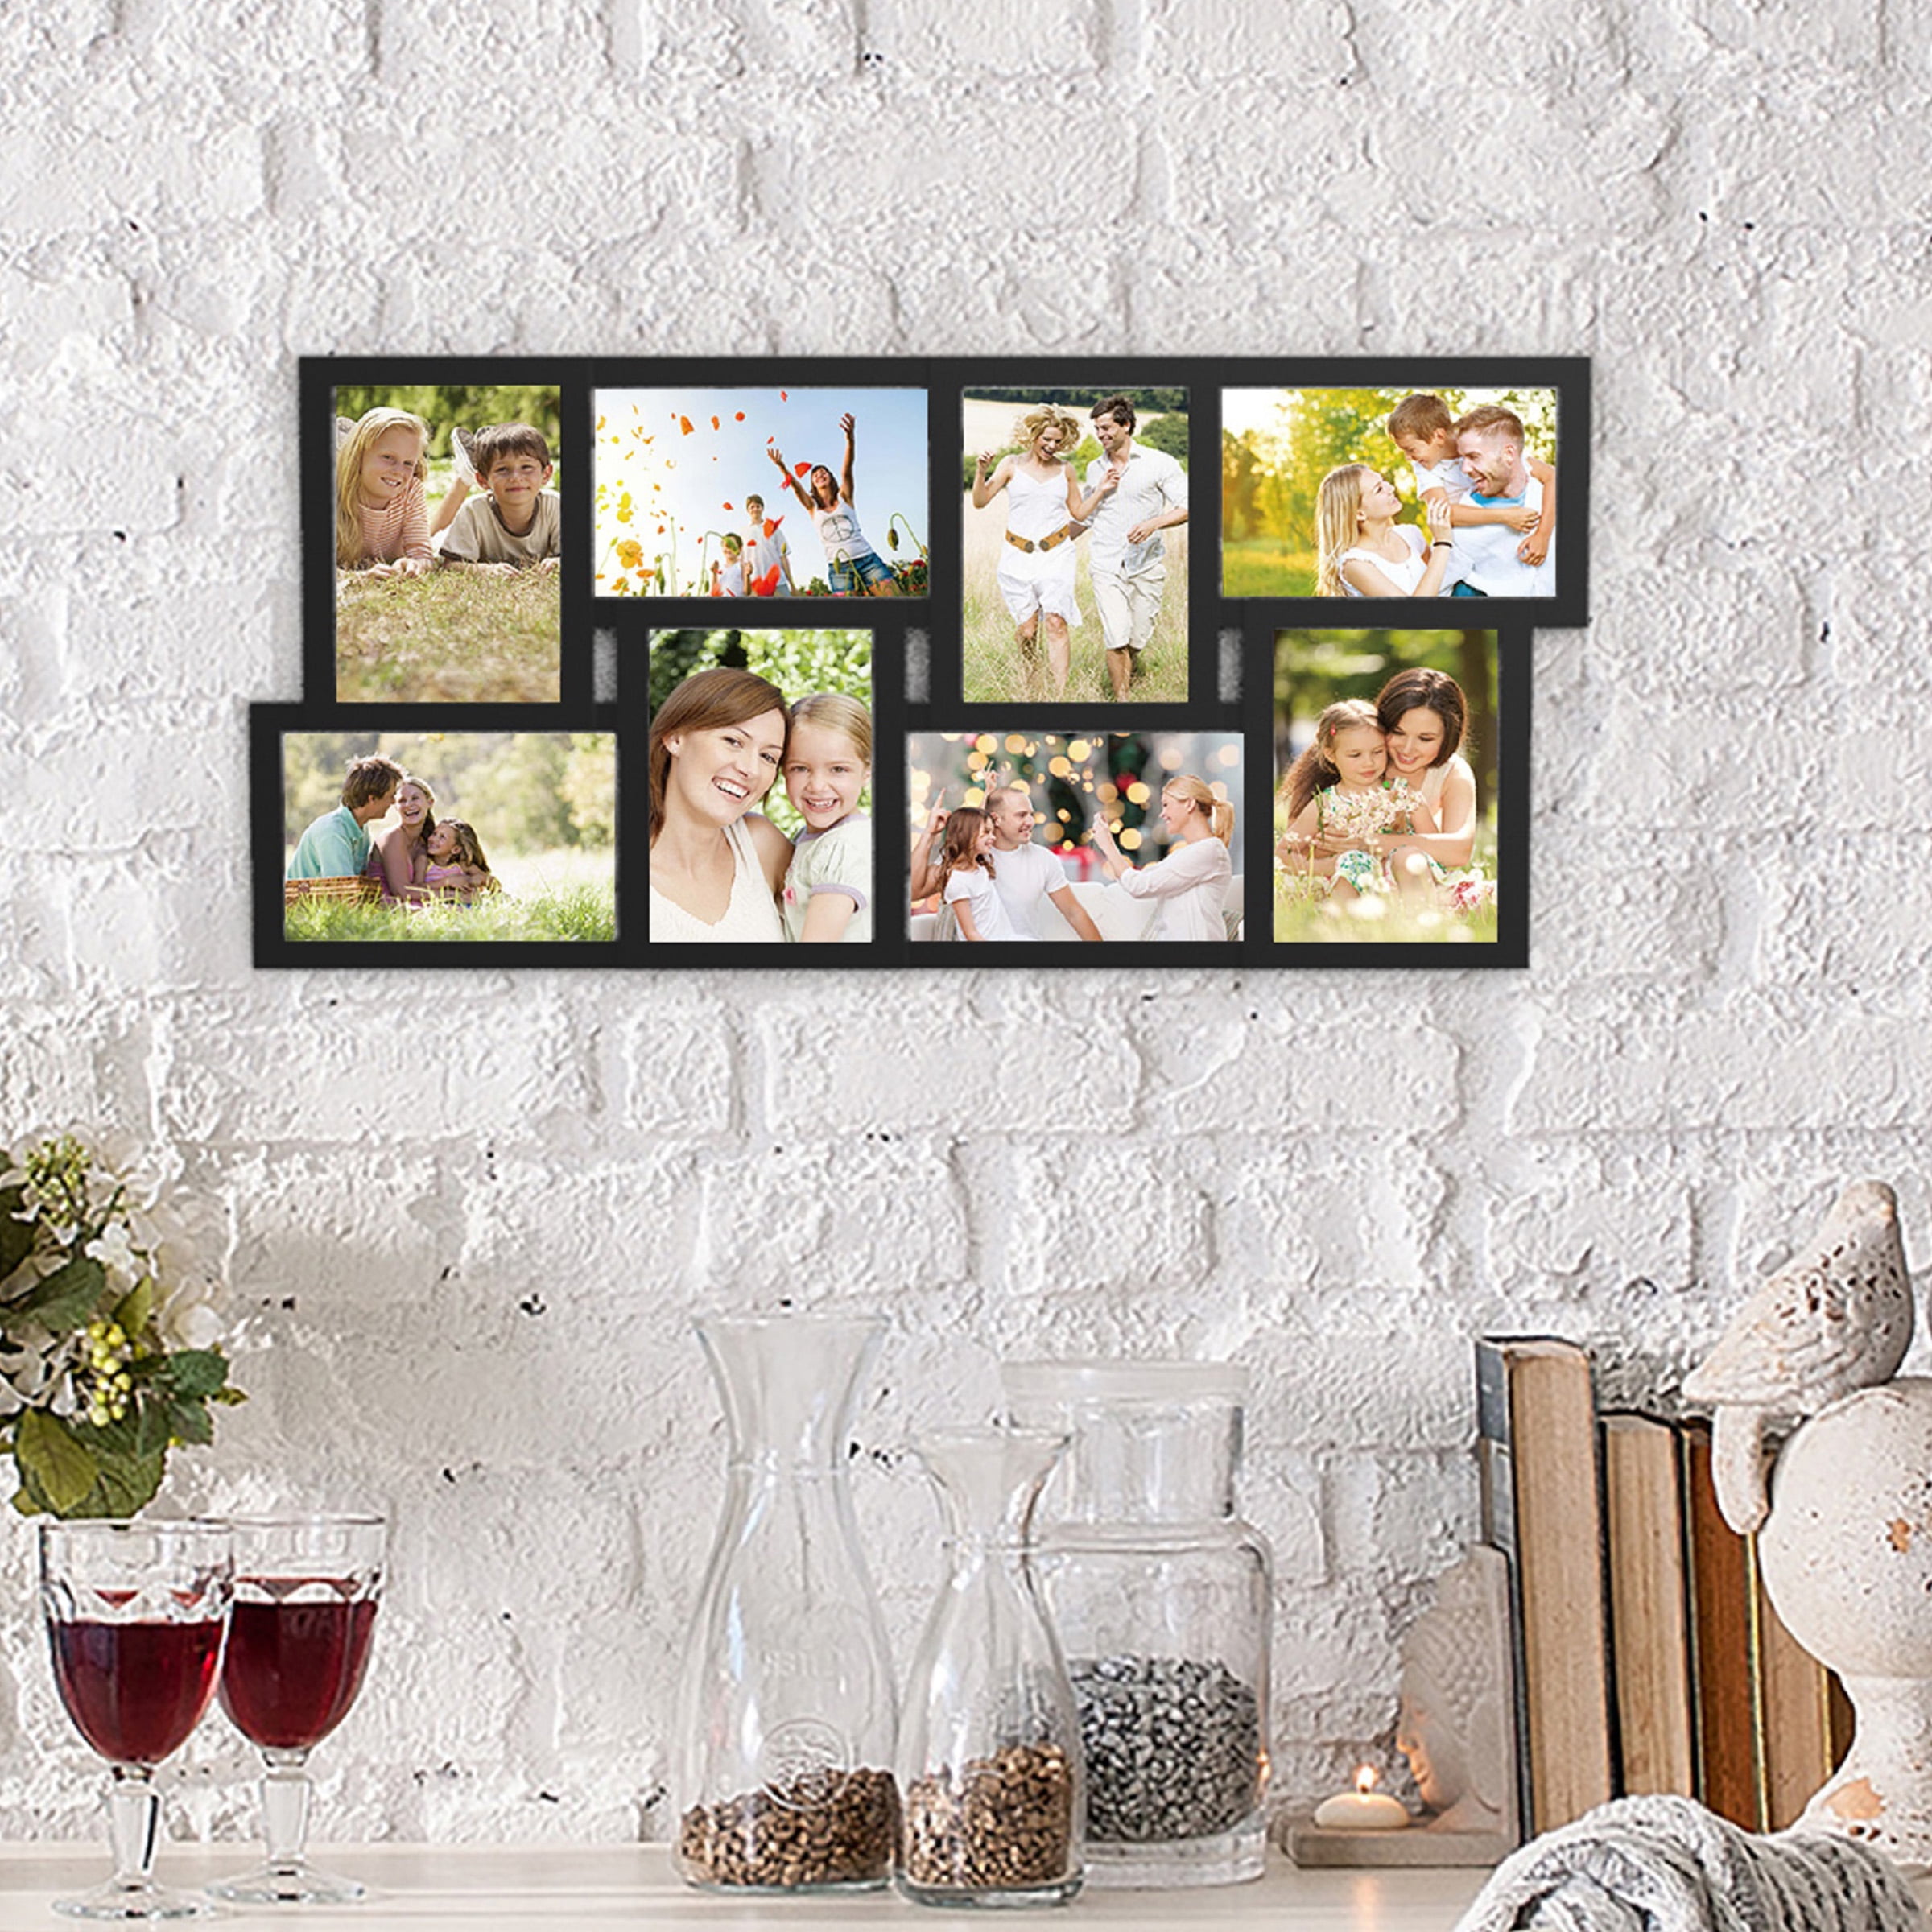 Lavish Home Collage Picture Frame with 8 Openings for 4x6 Photos